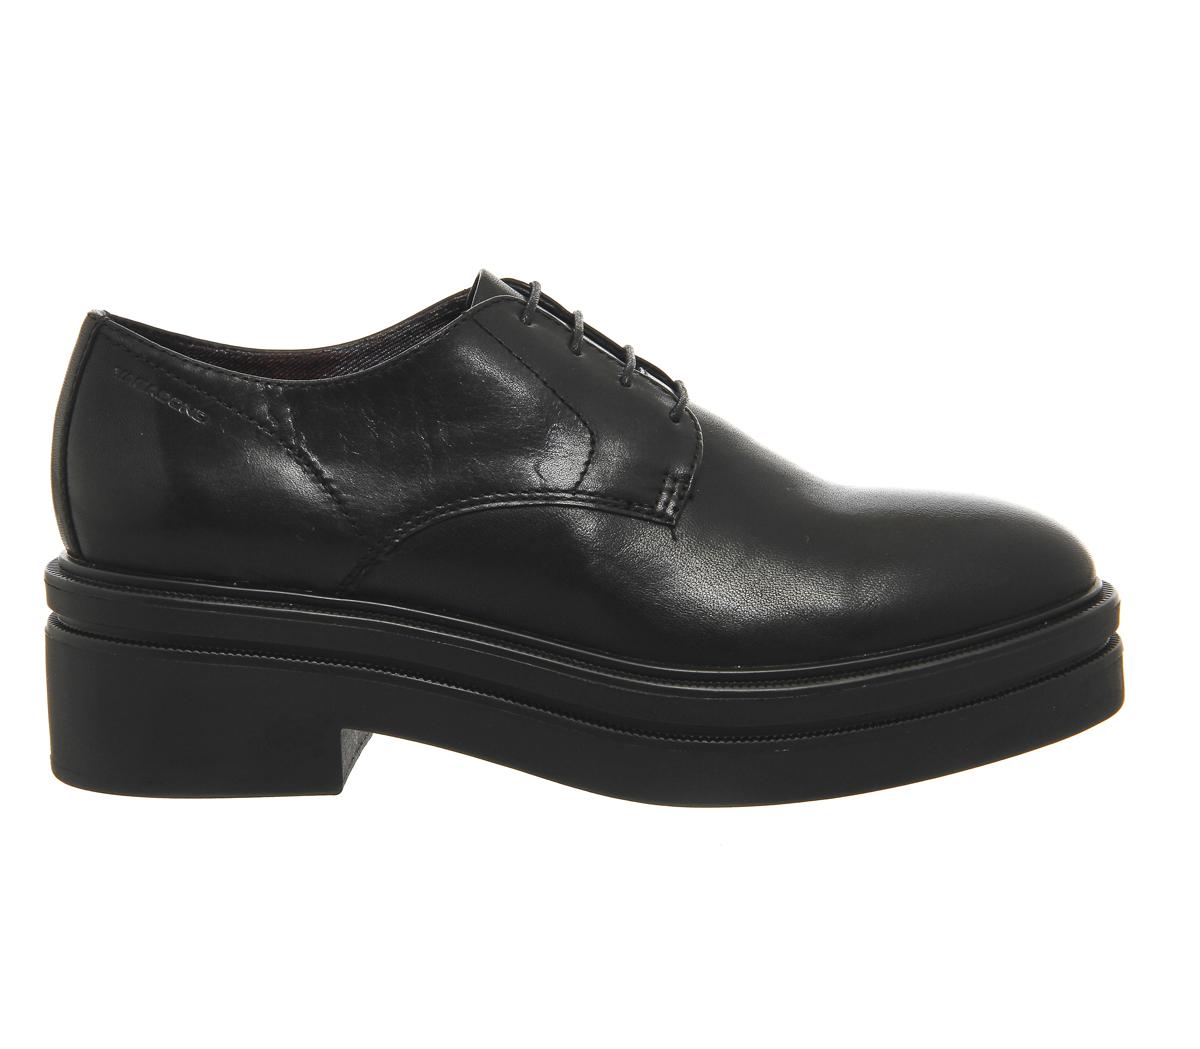 Vagabond Iza Lace Up Shoes in Black - Lyst